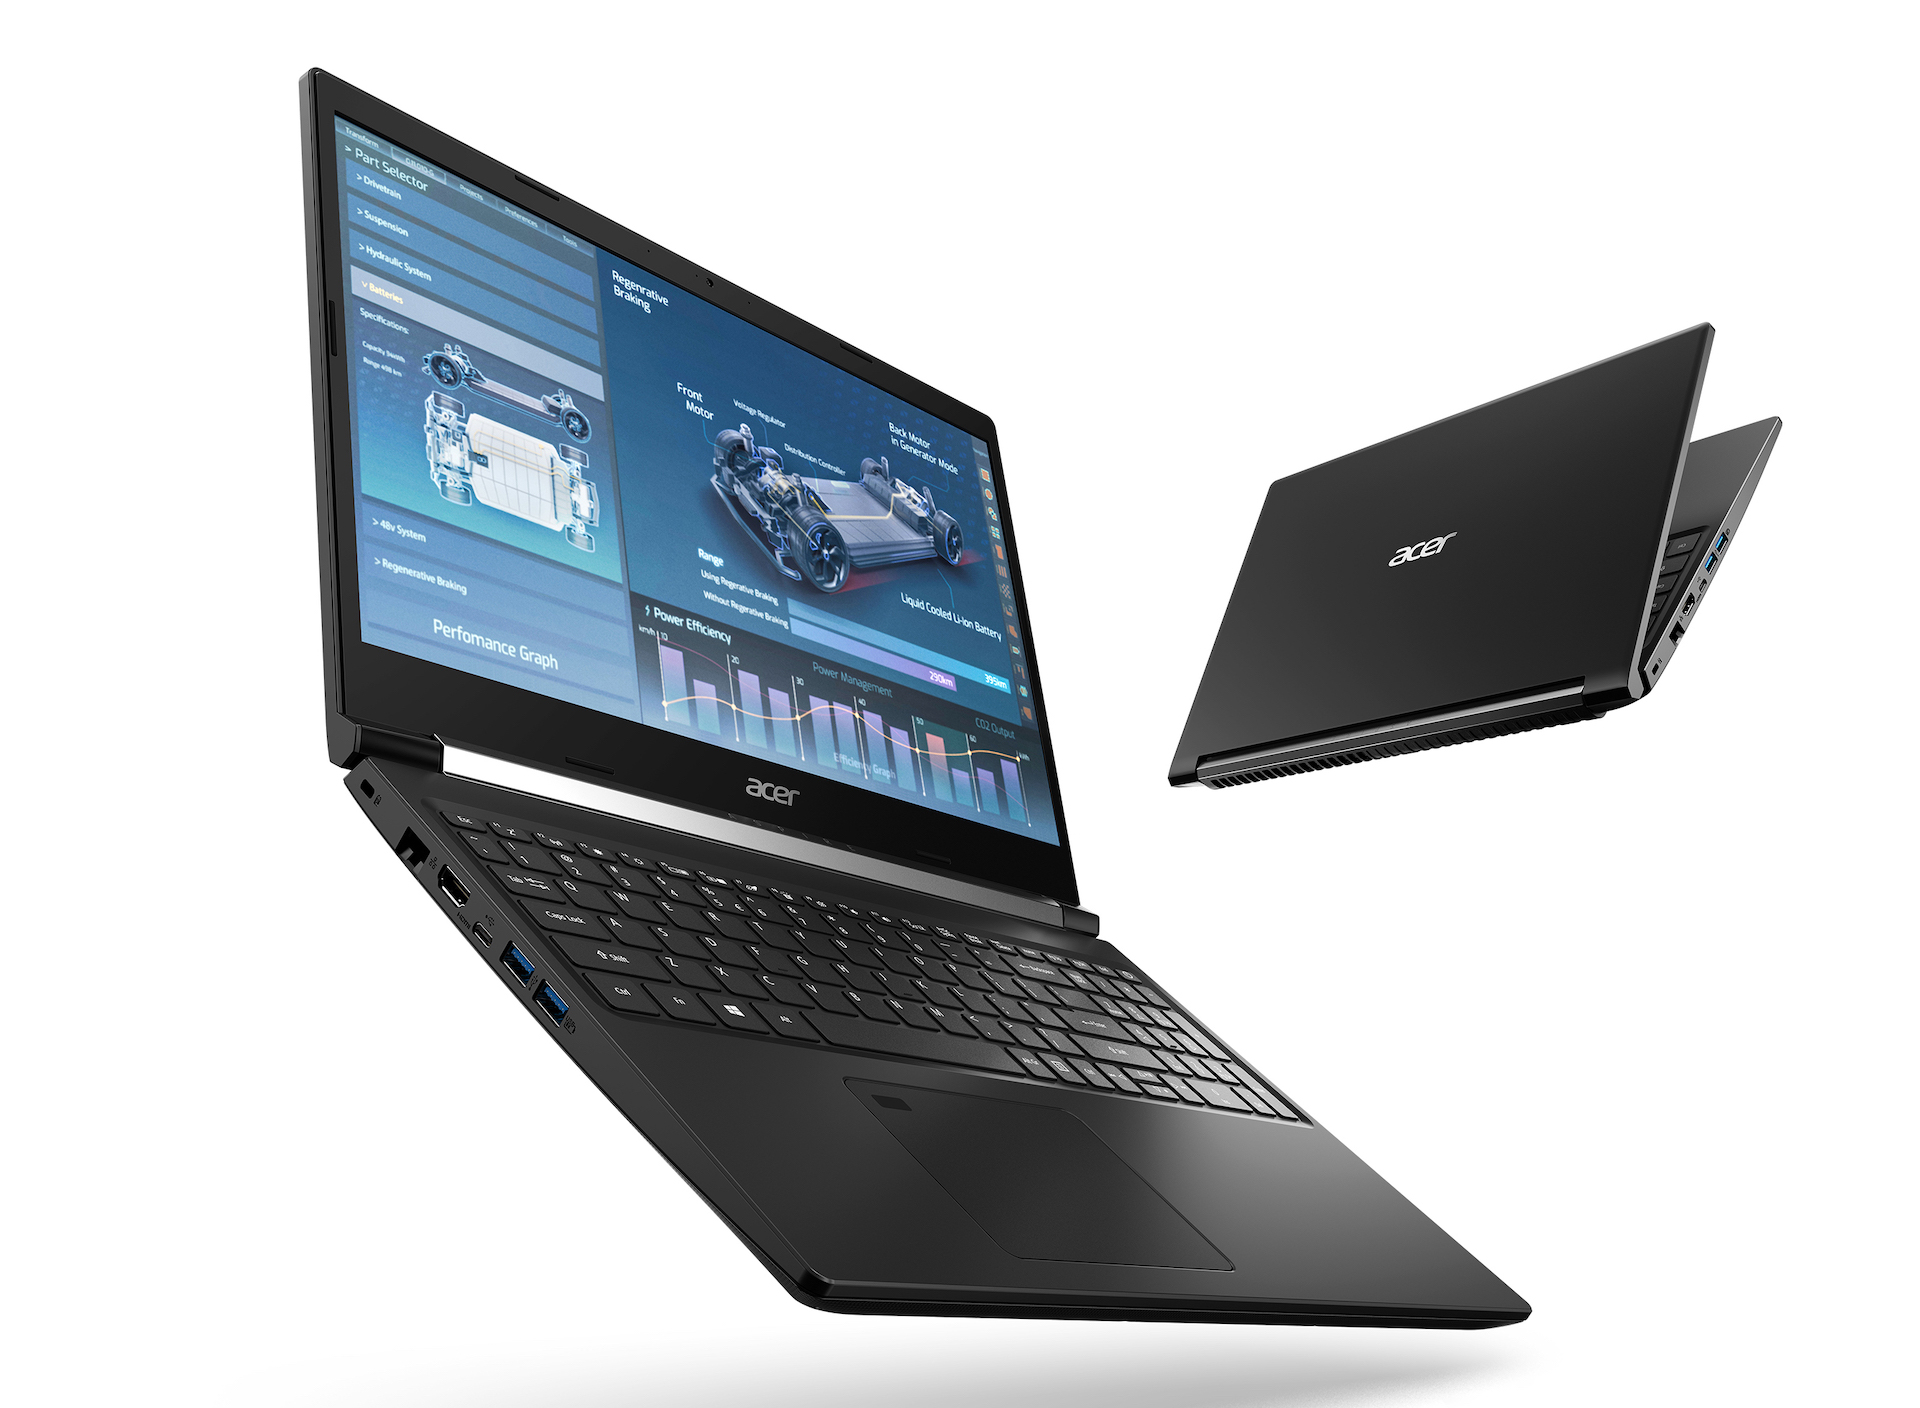 Acer’s sleek and powerful Aspire 7, available now in the UAE